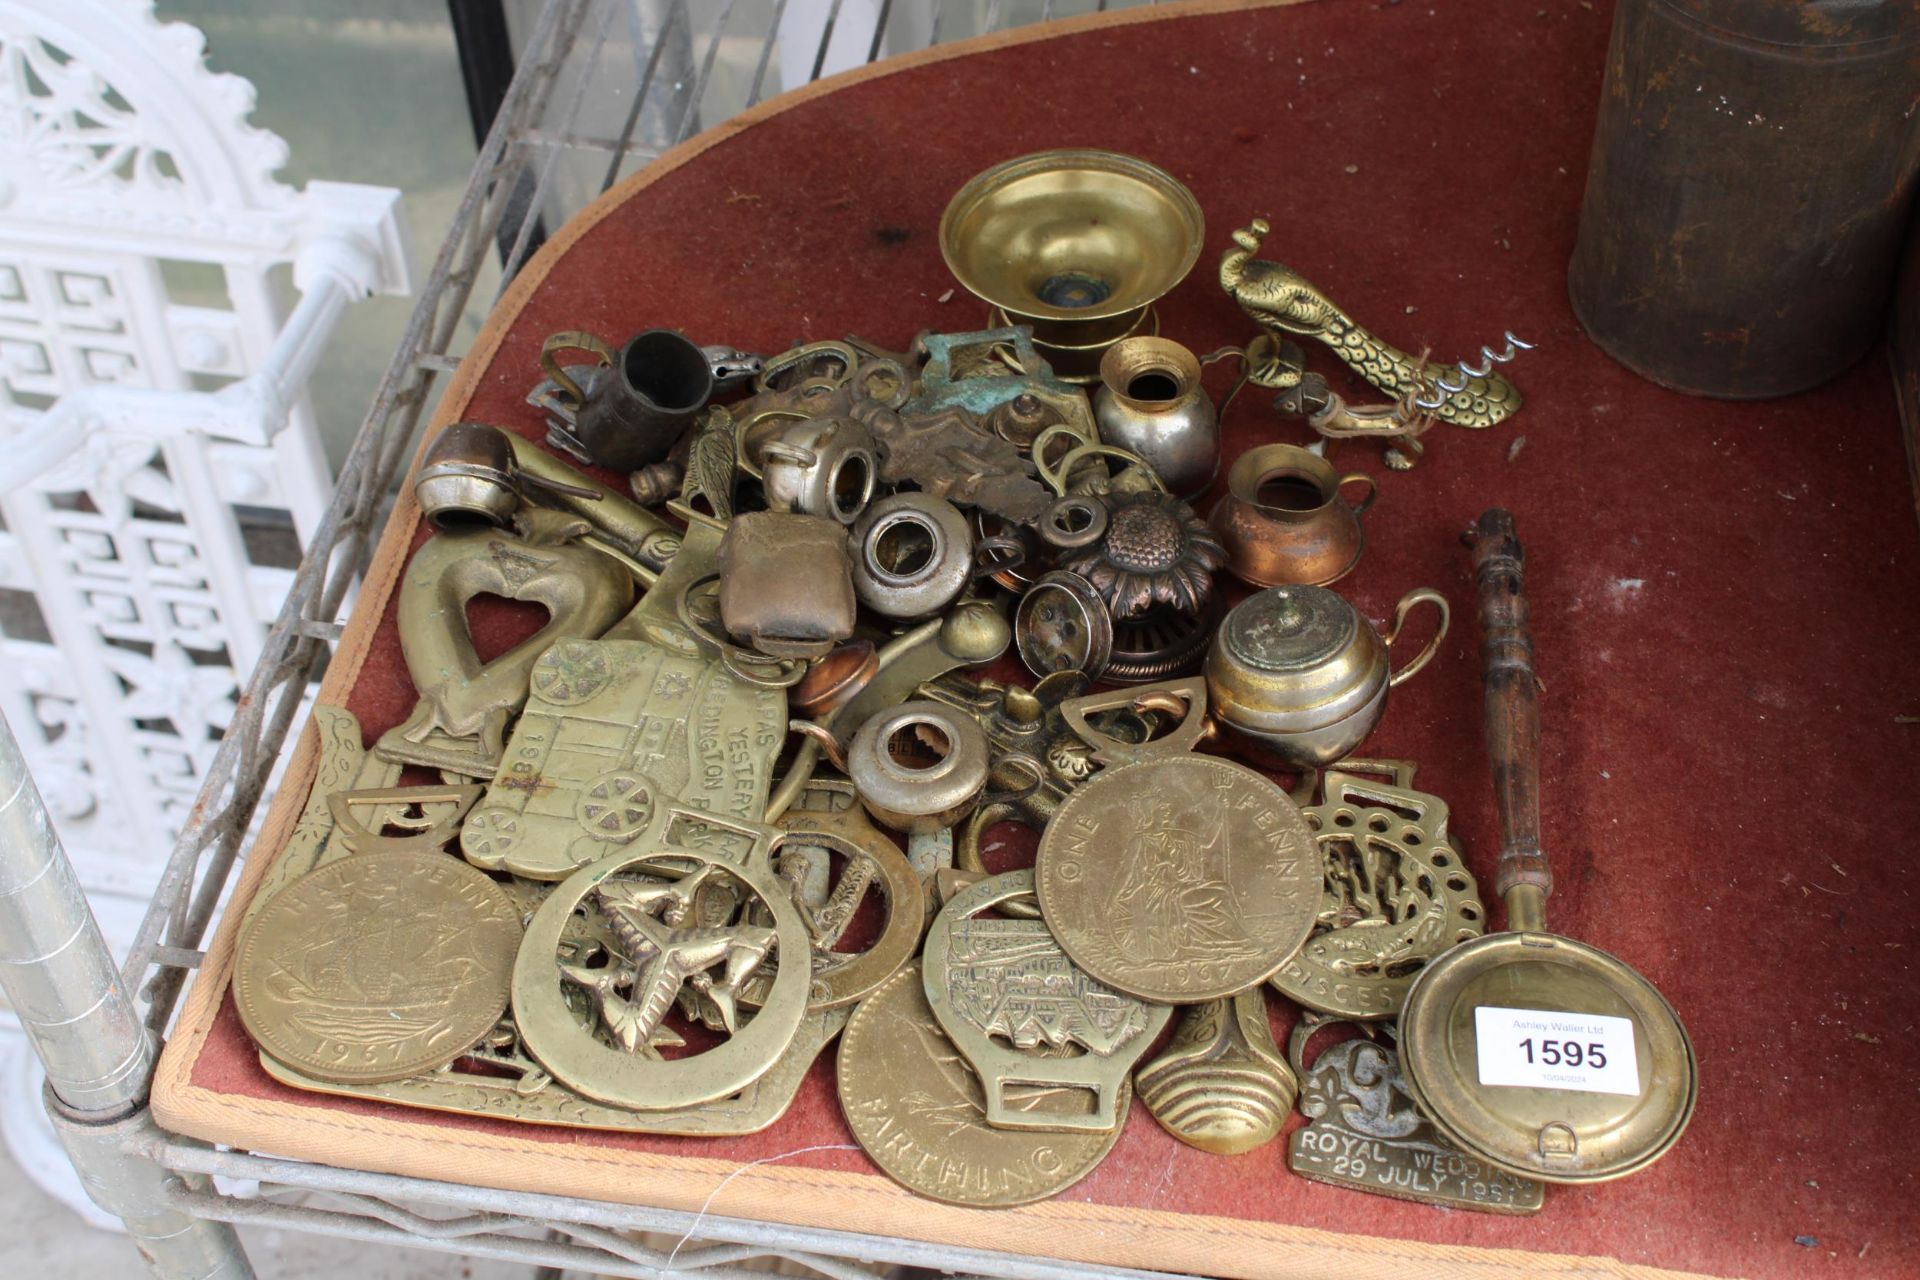 AN ASSORTMENT OF VINTAGE BRASS ITEMS TO INCLUDE MINIATURE JUGS, HORSE BRASSES AND ANIMAL FIGURES ETC